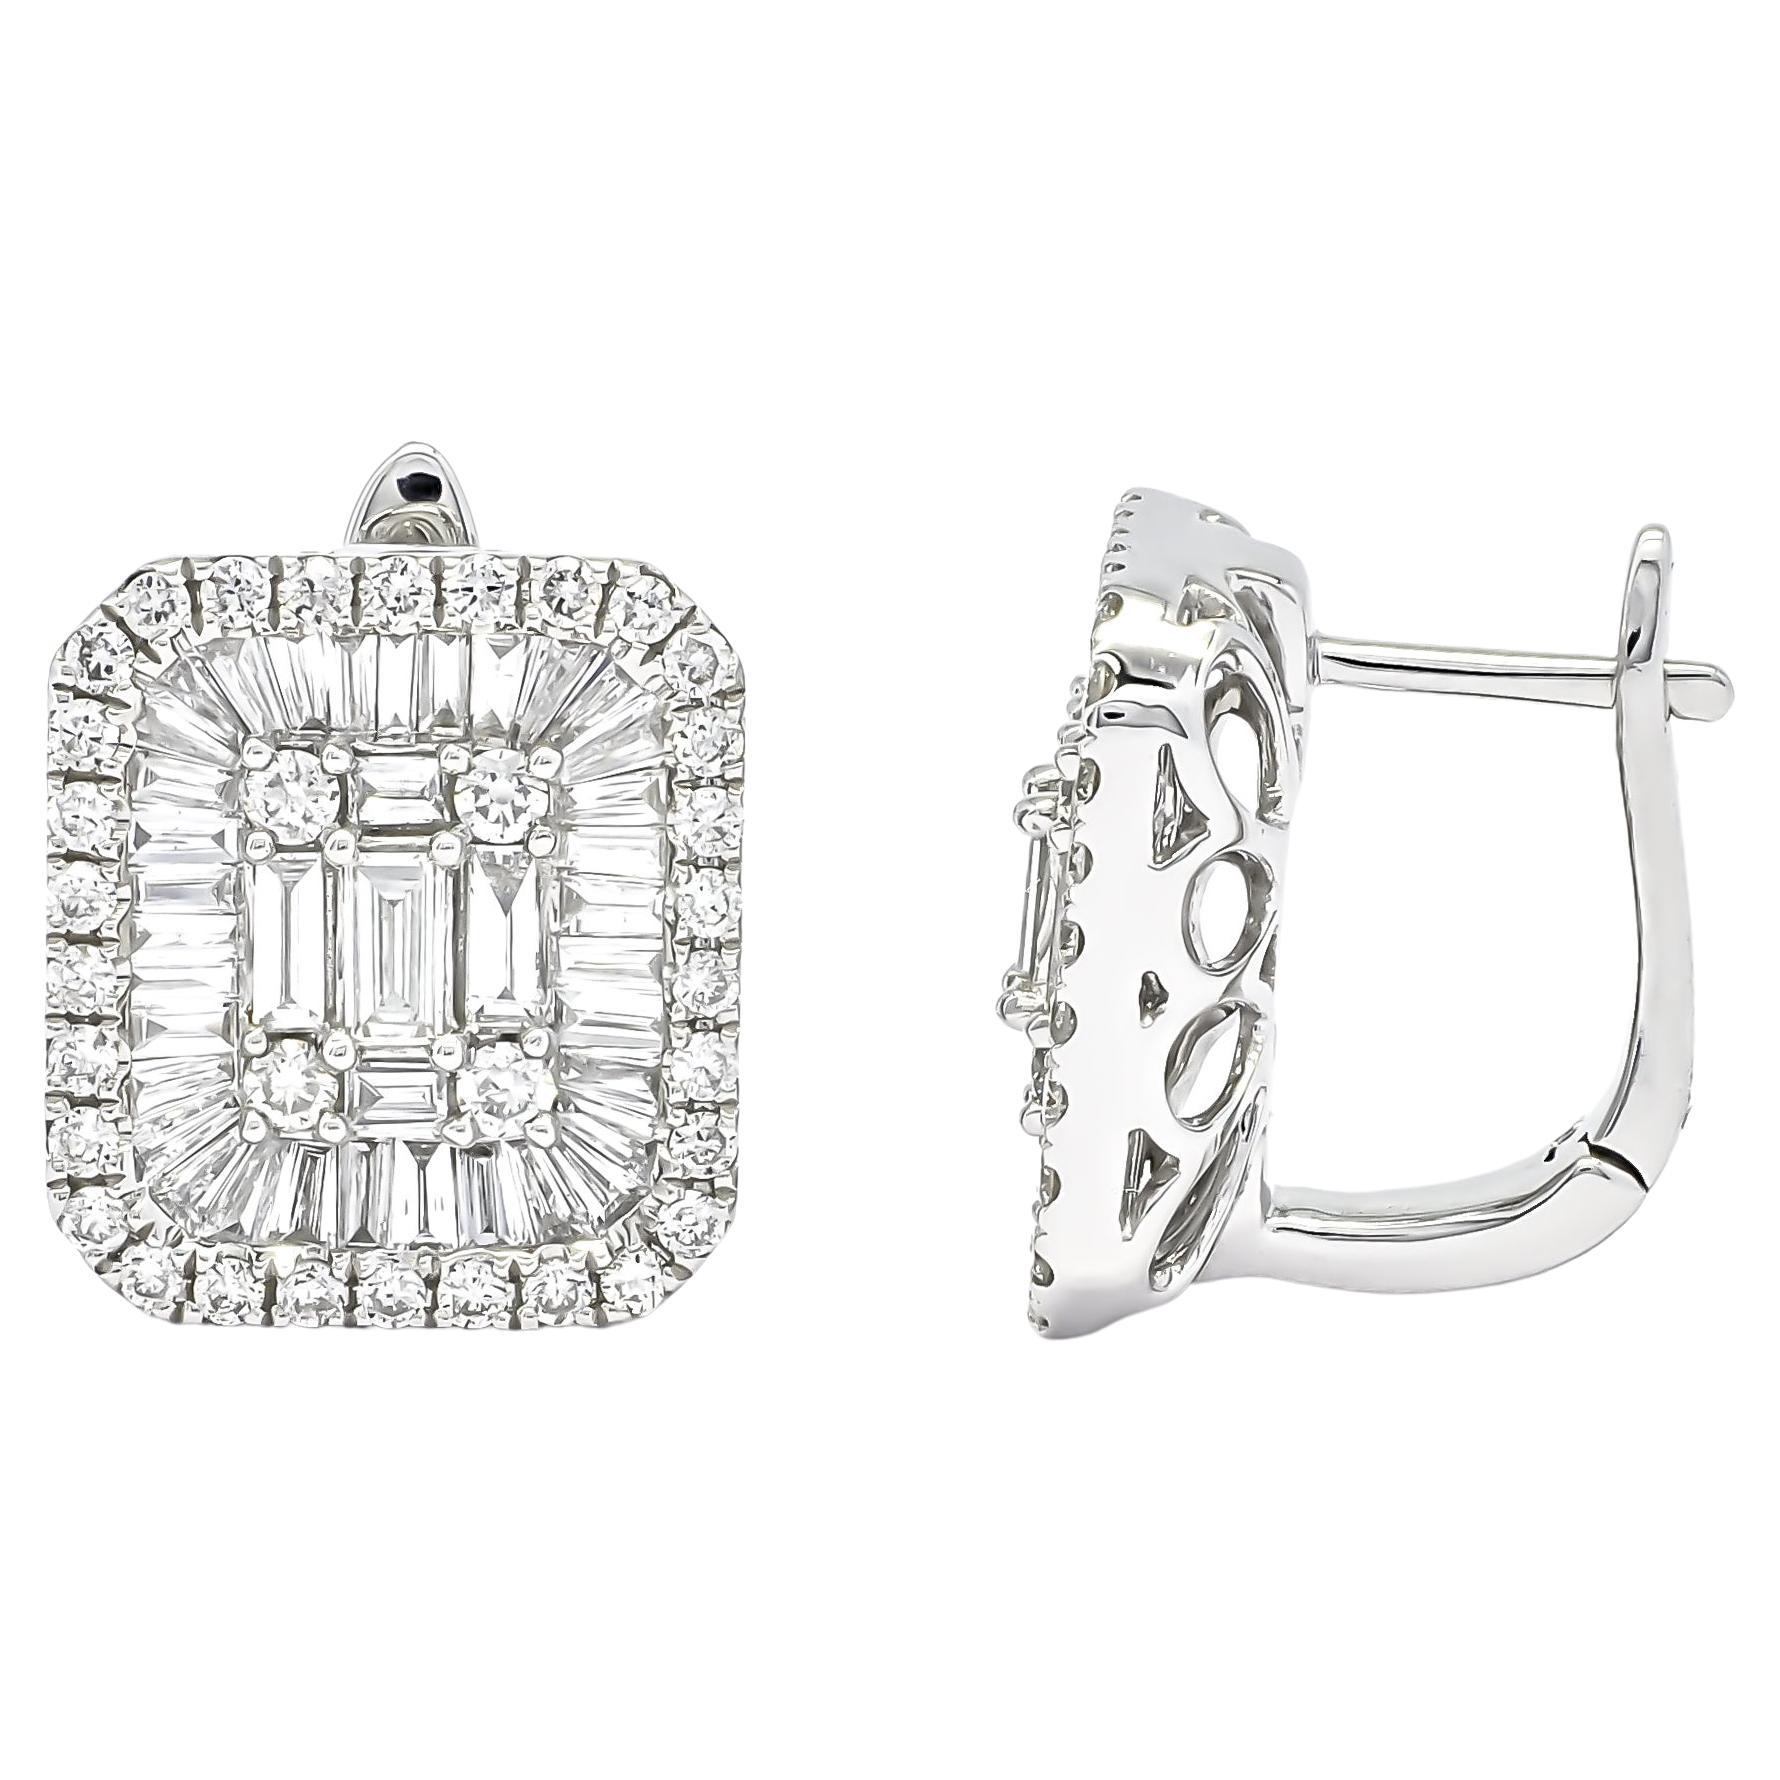 Exquisite and spectacular, round and baguette-cut diamonds come together with over-the-top sparkle on these bold Illusion Huggie stud earrings. 

Stunning baguette-cut stones combine with gorgeous round stones to create an intricate and fascinating